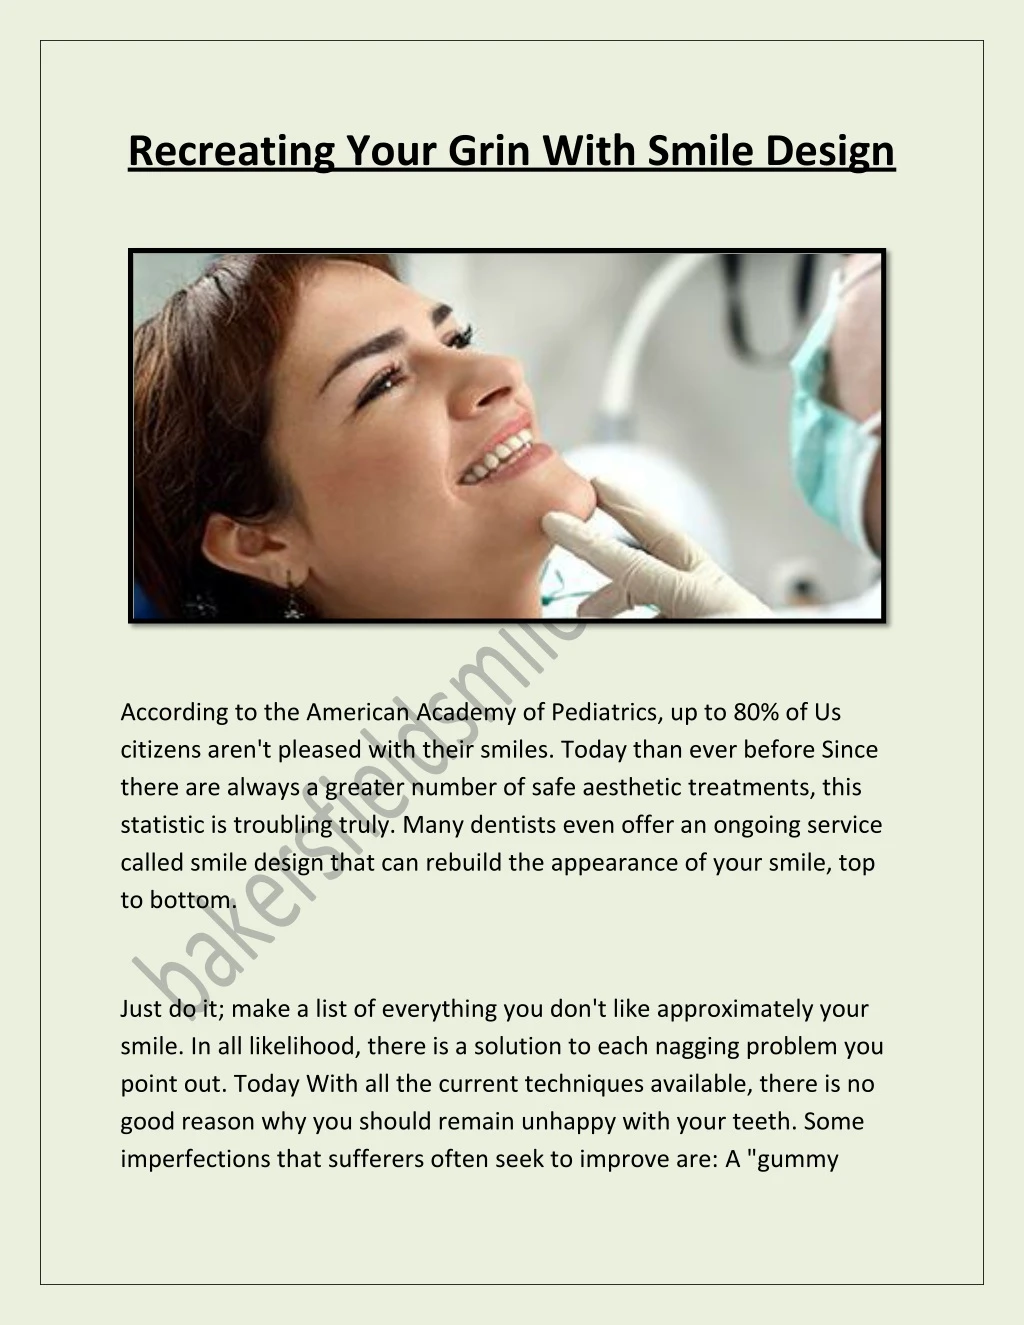 recreating your grin with smile design